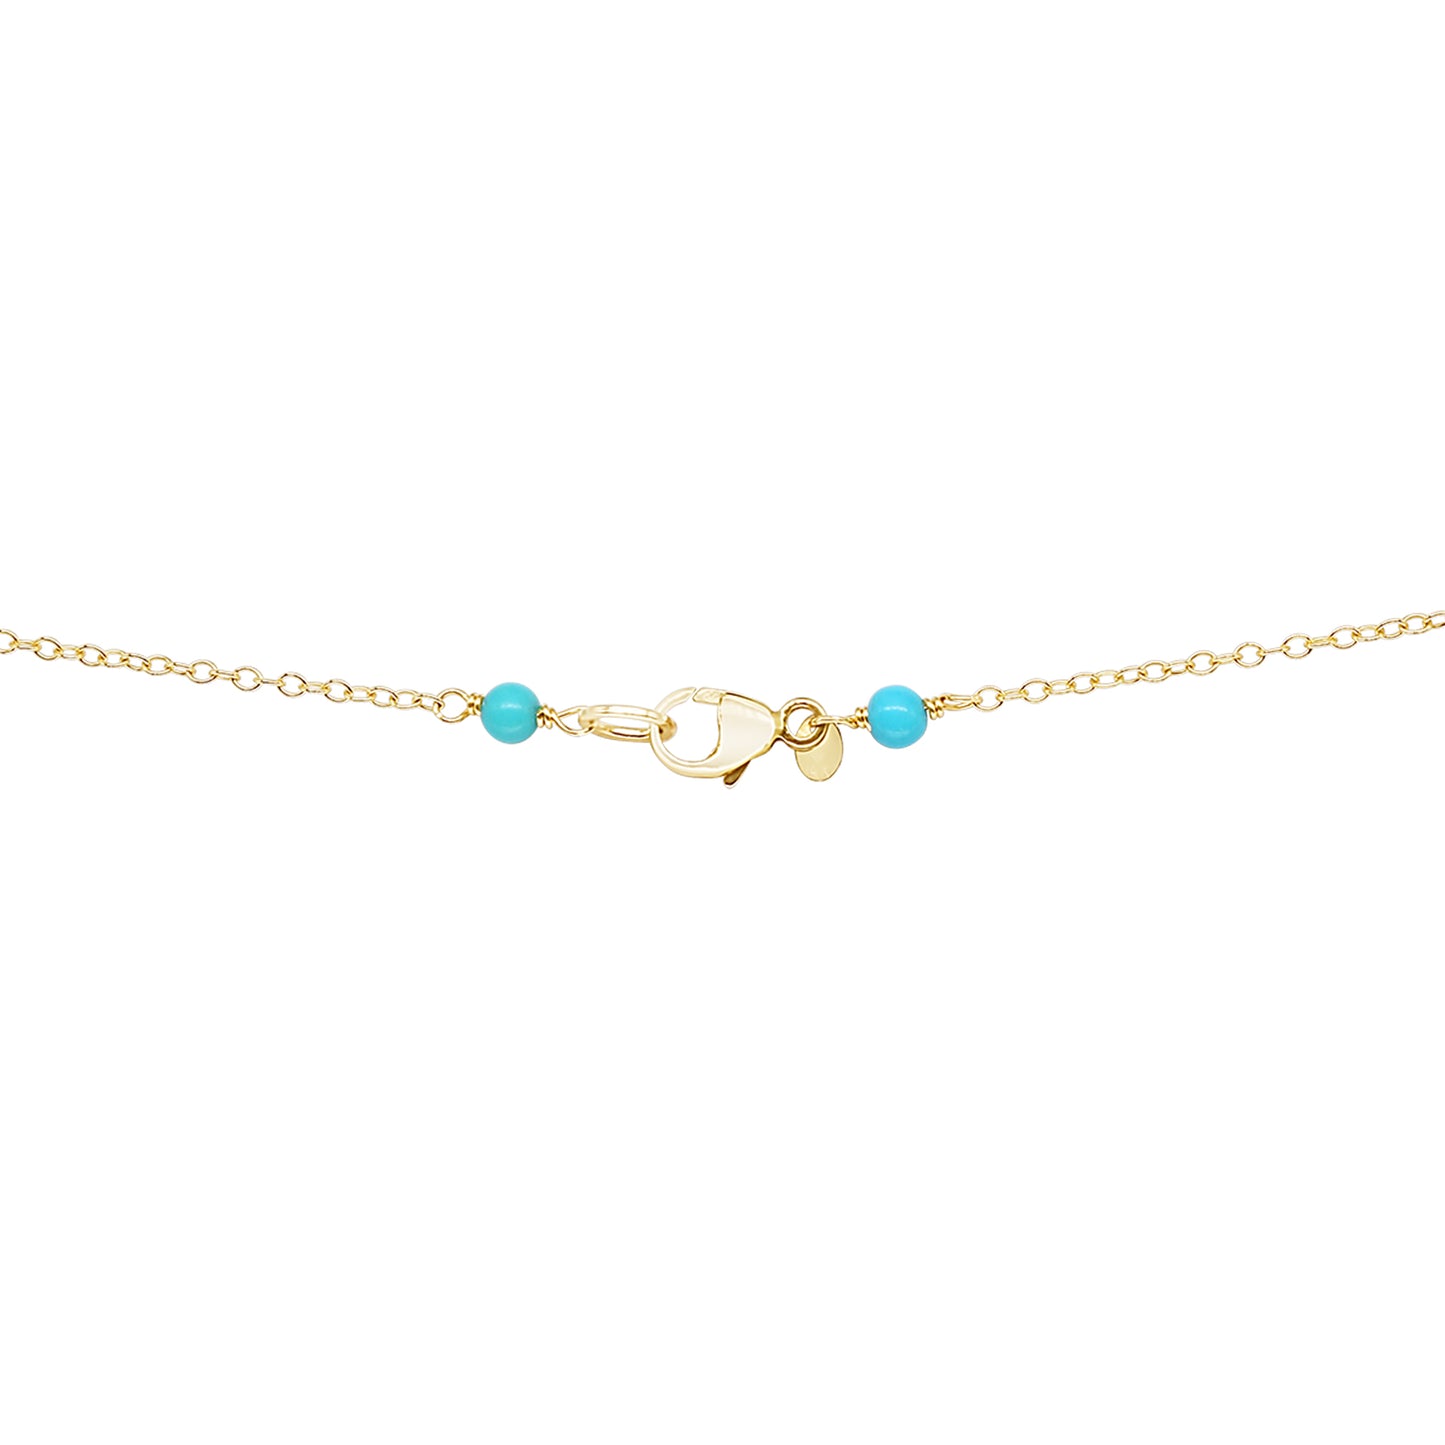 14k White Freshwater Pearl Turquoise Station Necklace 18"